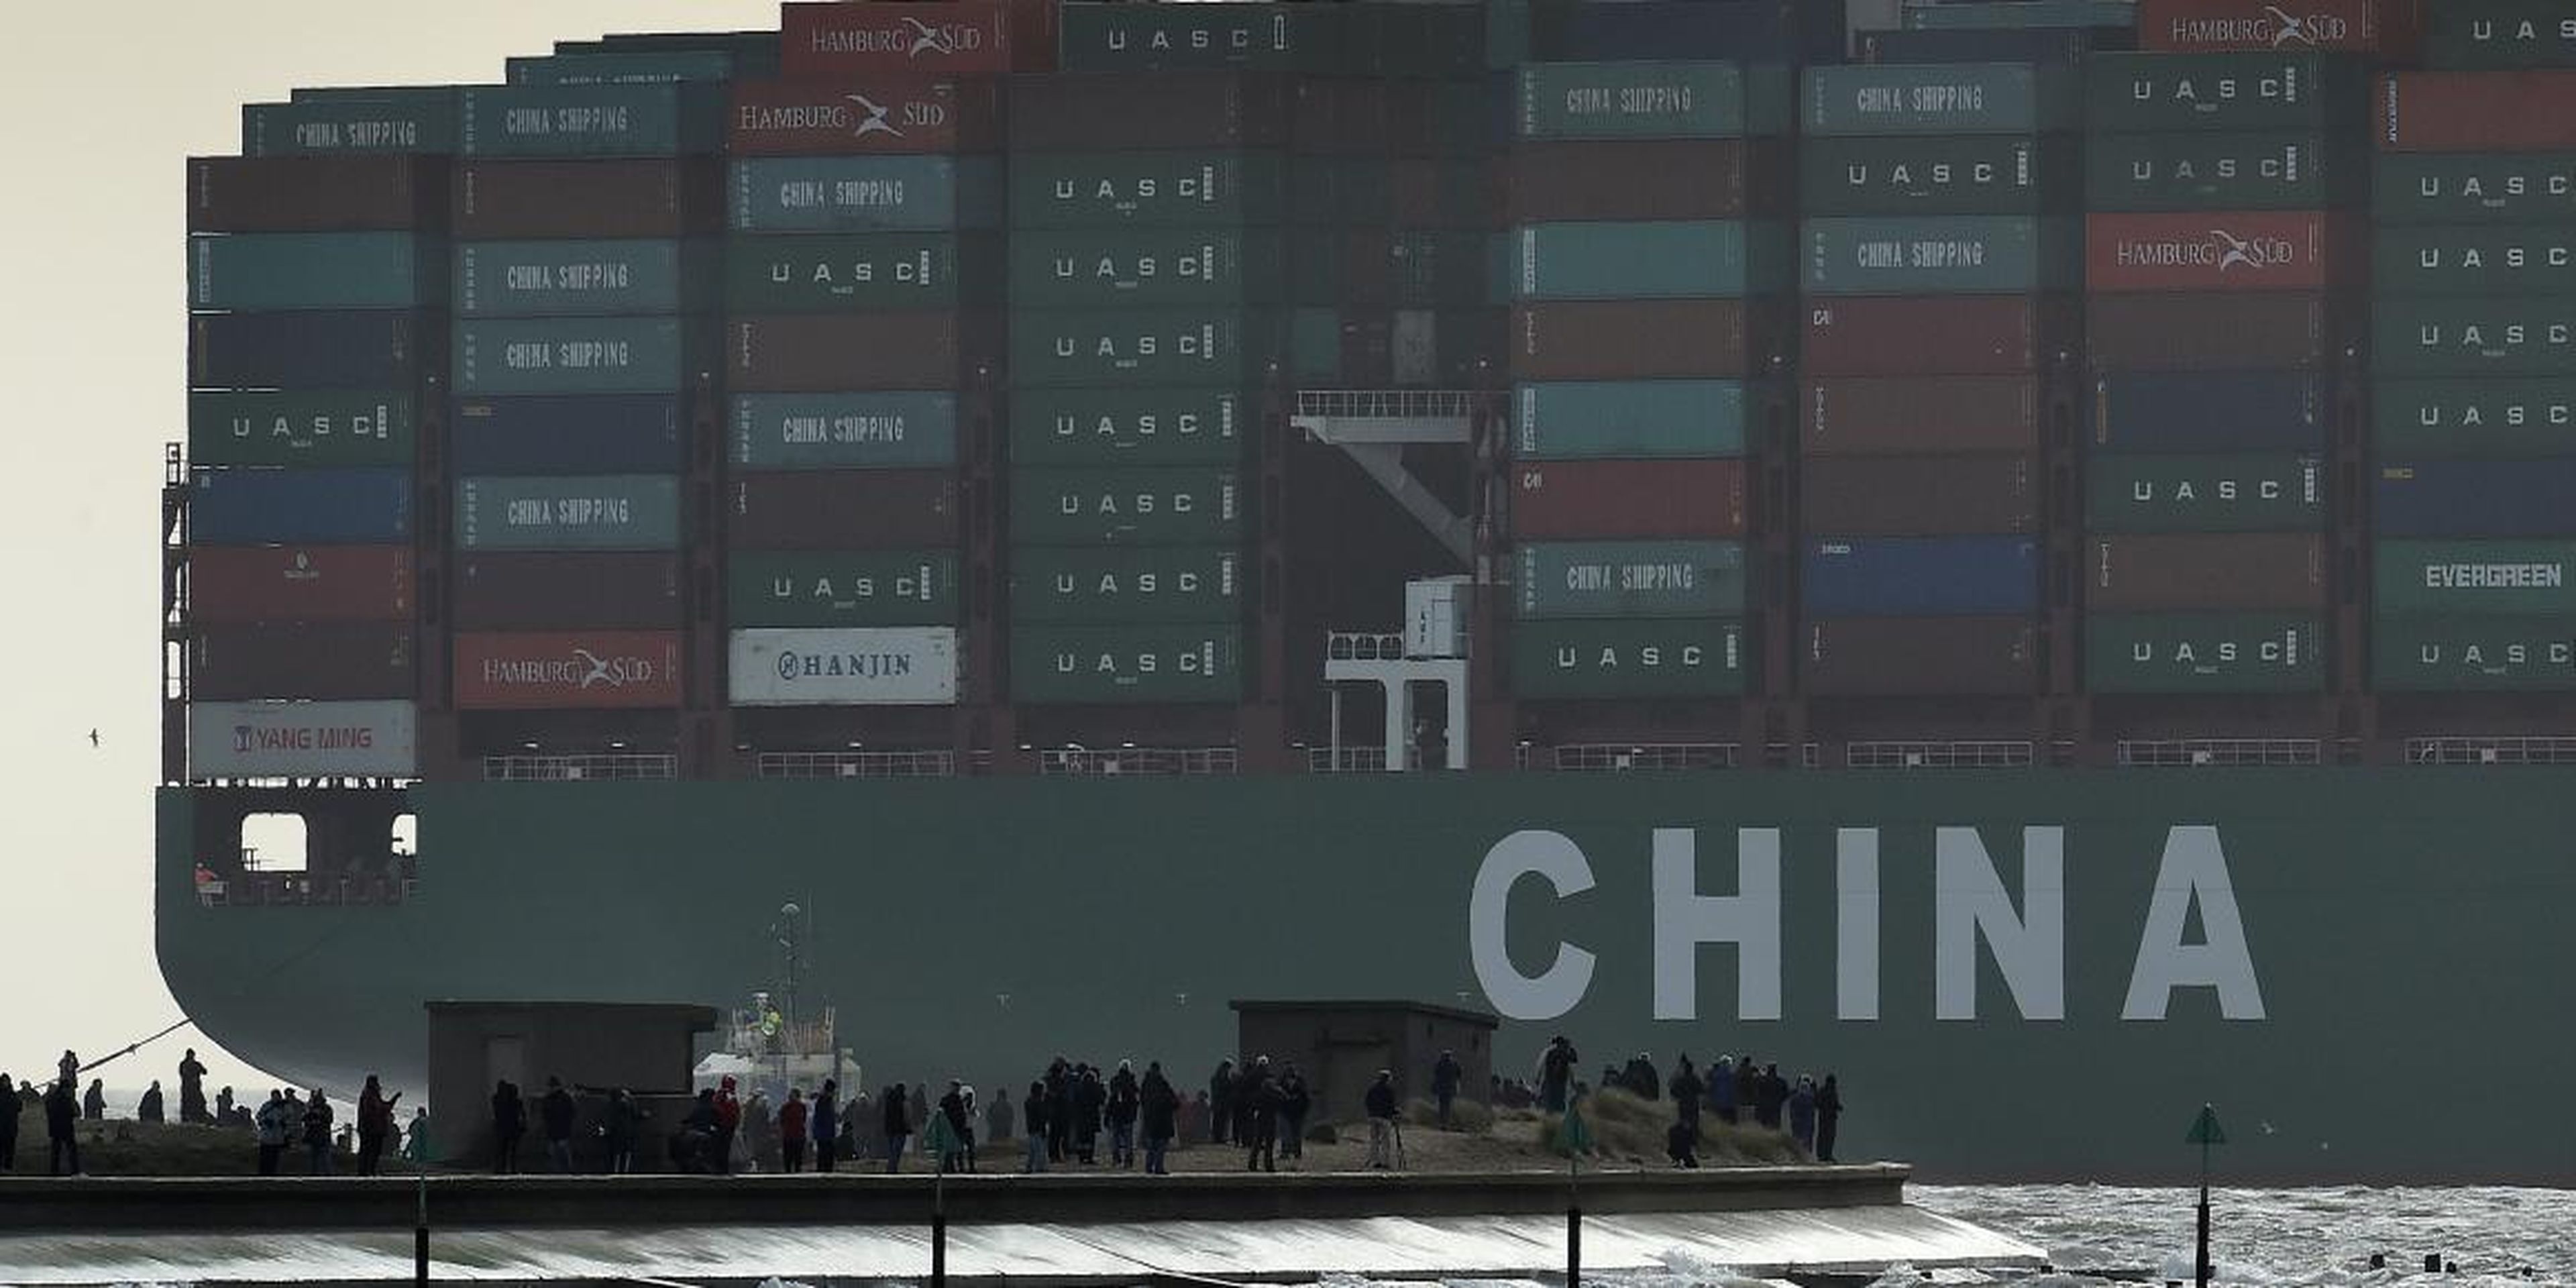 Onlookers watch from a harbor wall as the largest container ship in world, CSCL Globe, docks during its maiden voyage, at the port of Felixstowe in south east England, Jan. 7, 2015.